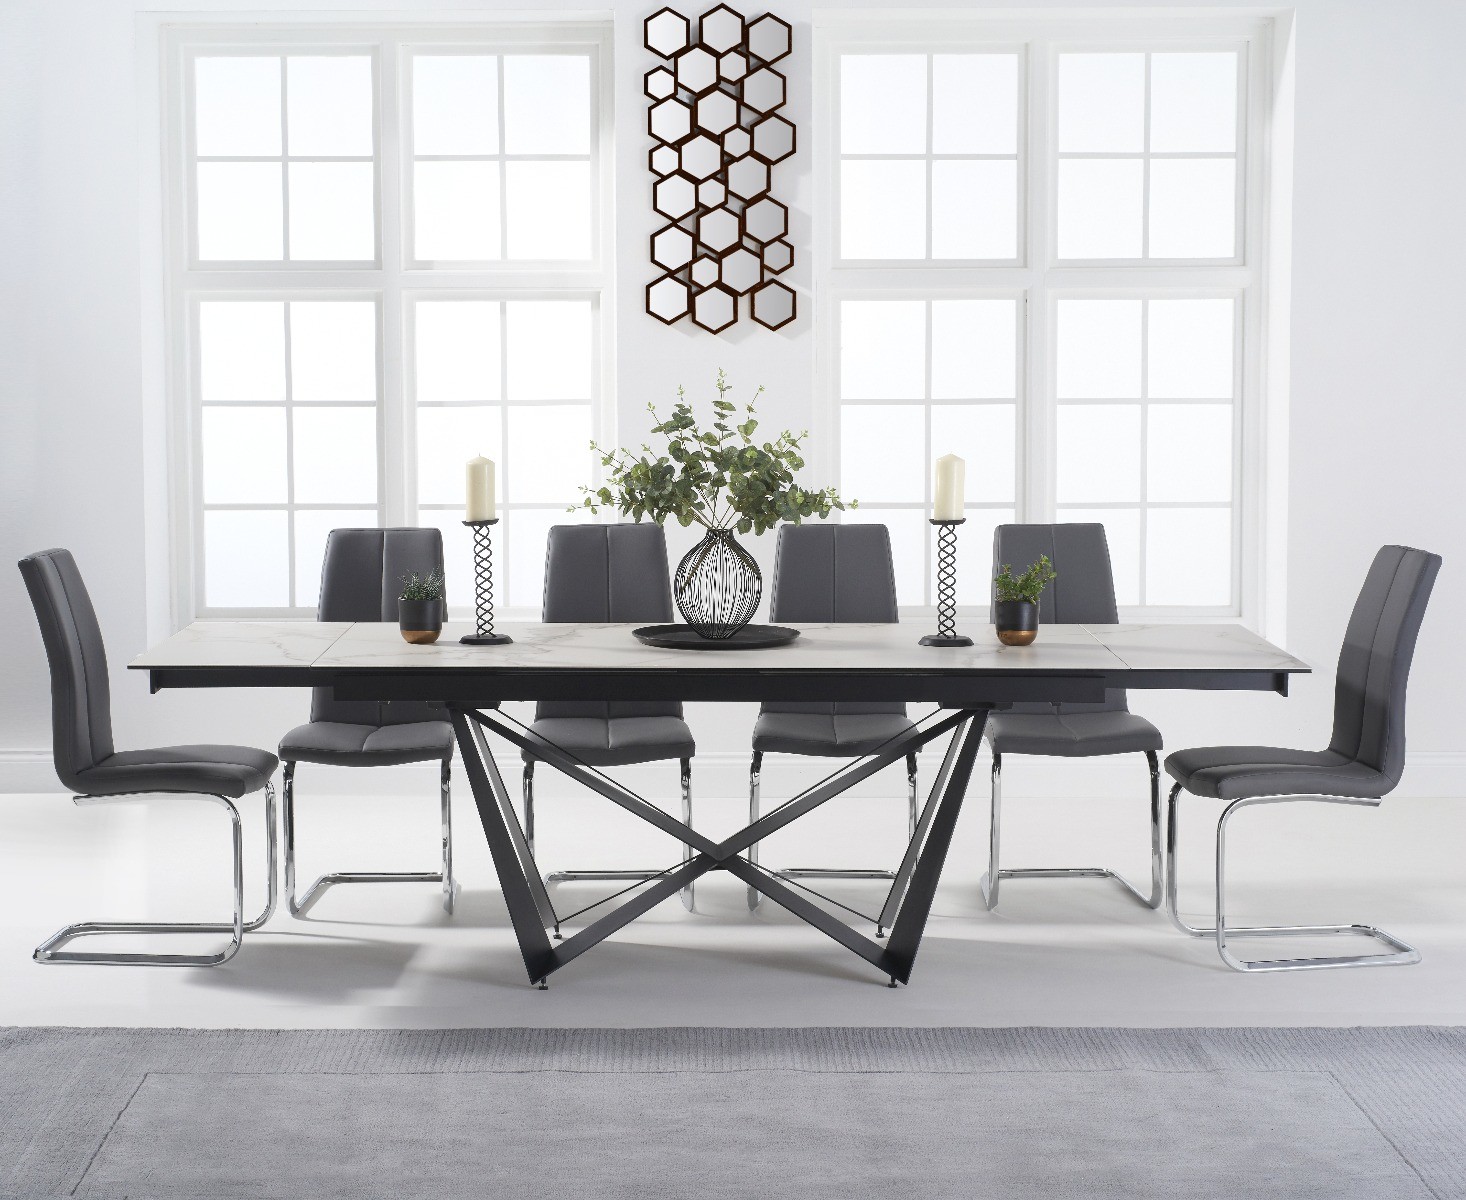 Blenheim 180cm White Ceramic Dining Table With 6 Grey Tarin Chairs